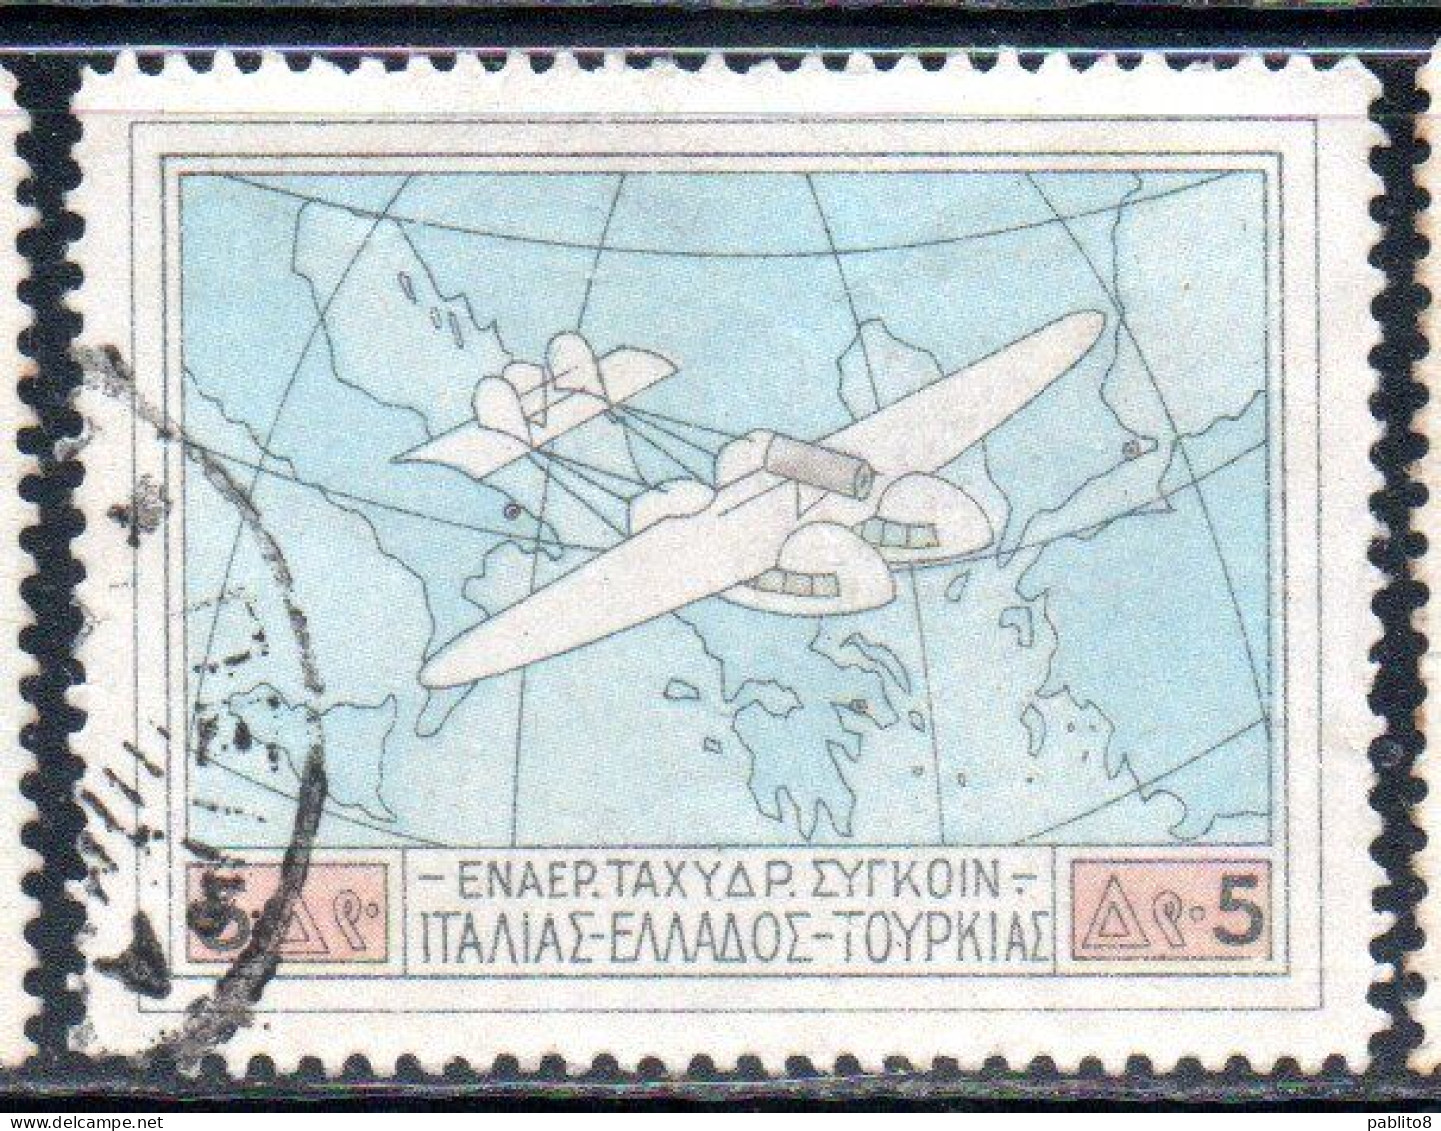 GREECE GRECIA ELLAS 1926 AIR POST MAIL AIRMAIL ITALY-TURKEY-RHODES SERVICE FLYING BOAT OVER MAP SOUTHERN EUROPA 5d USED - Gebruikt